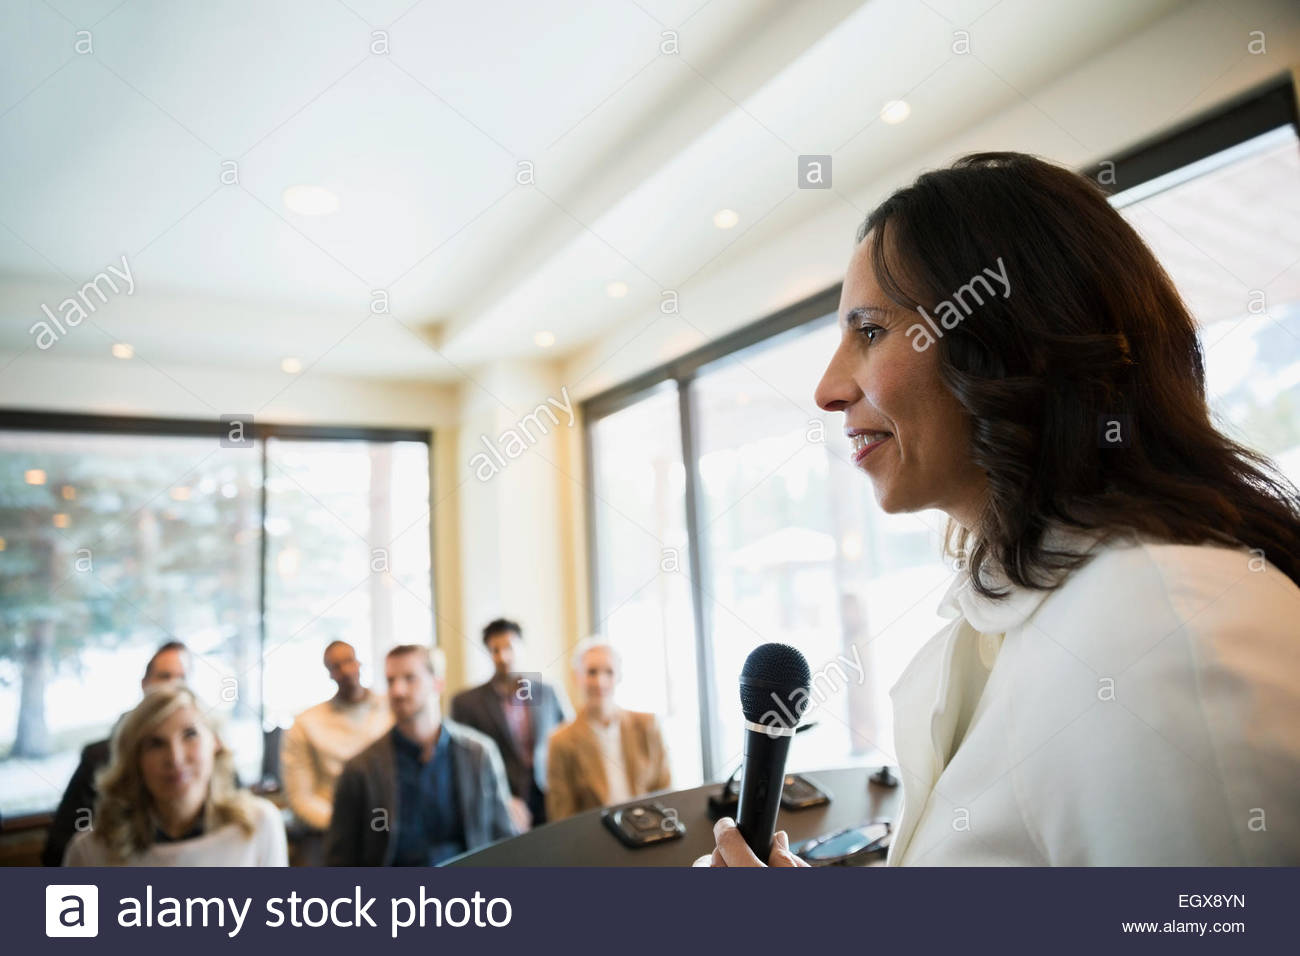 Businesswoman with microphone leading conference Stock Photo